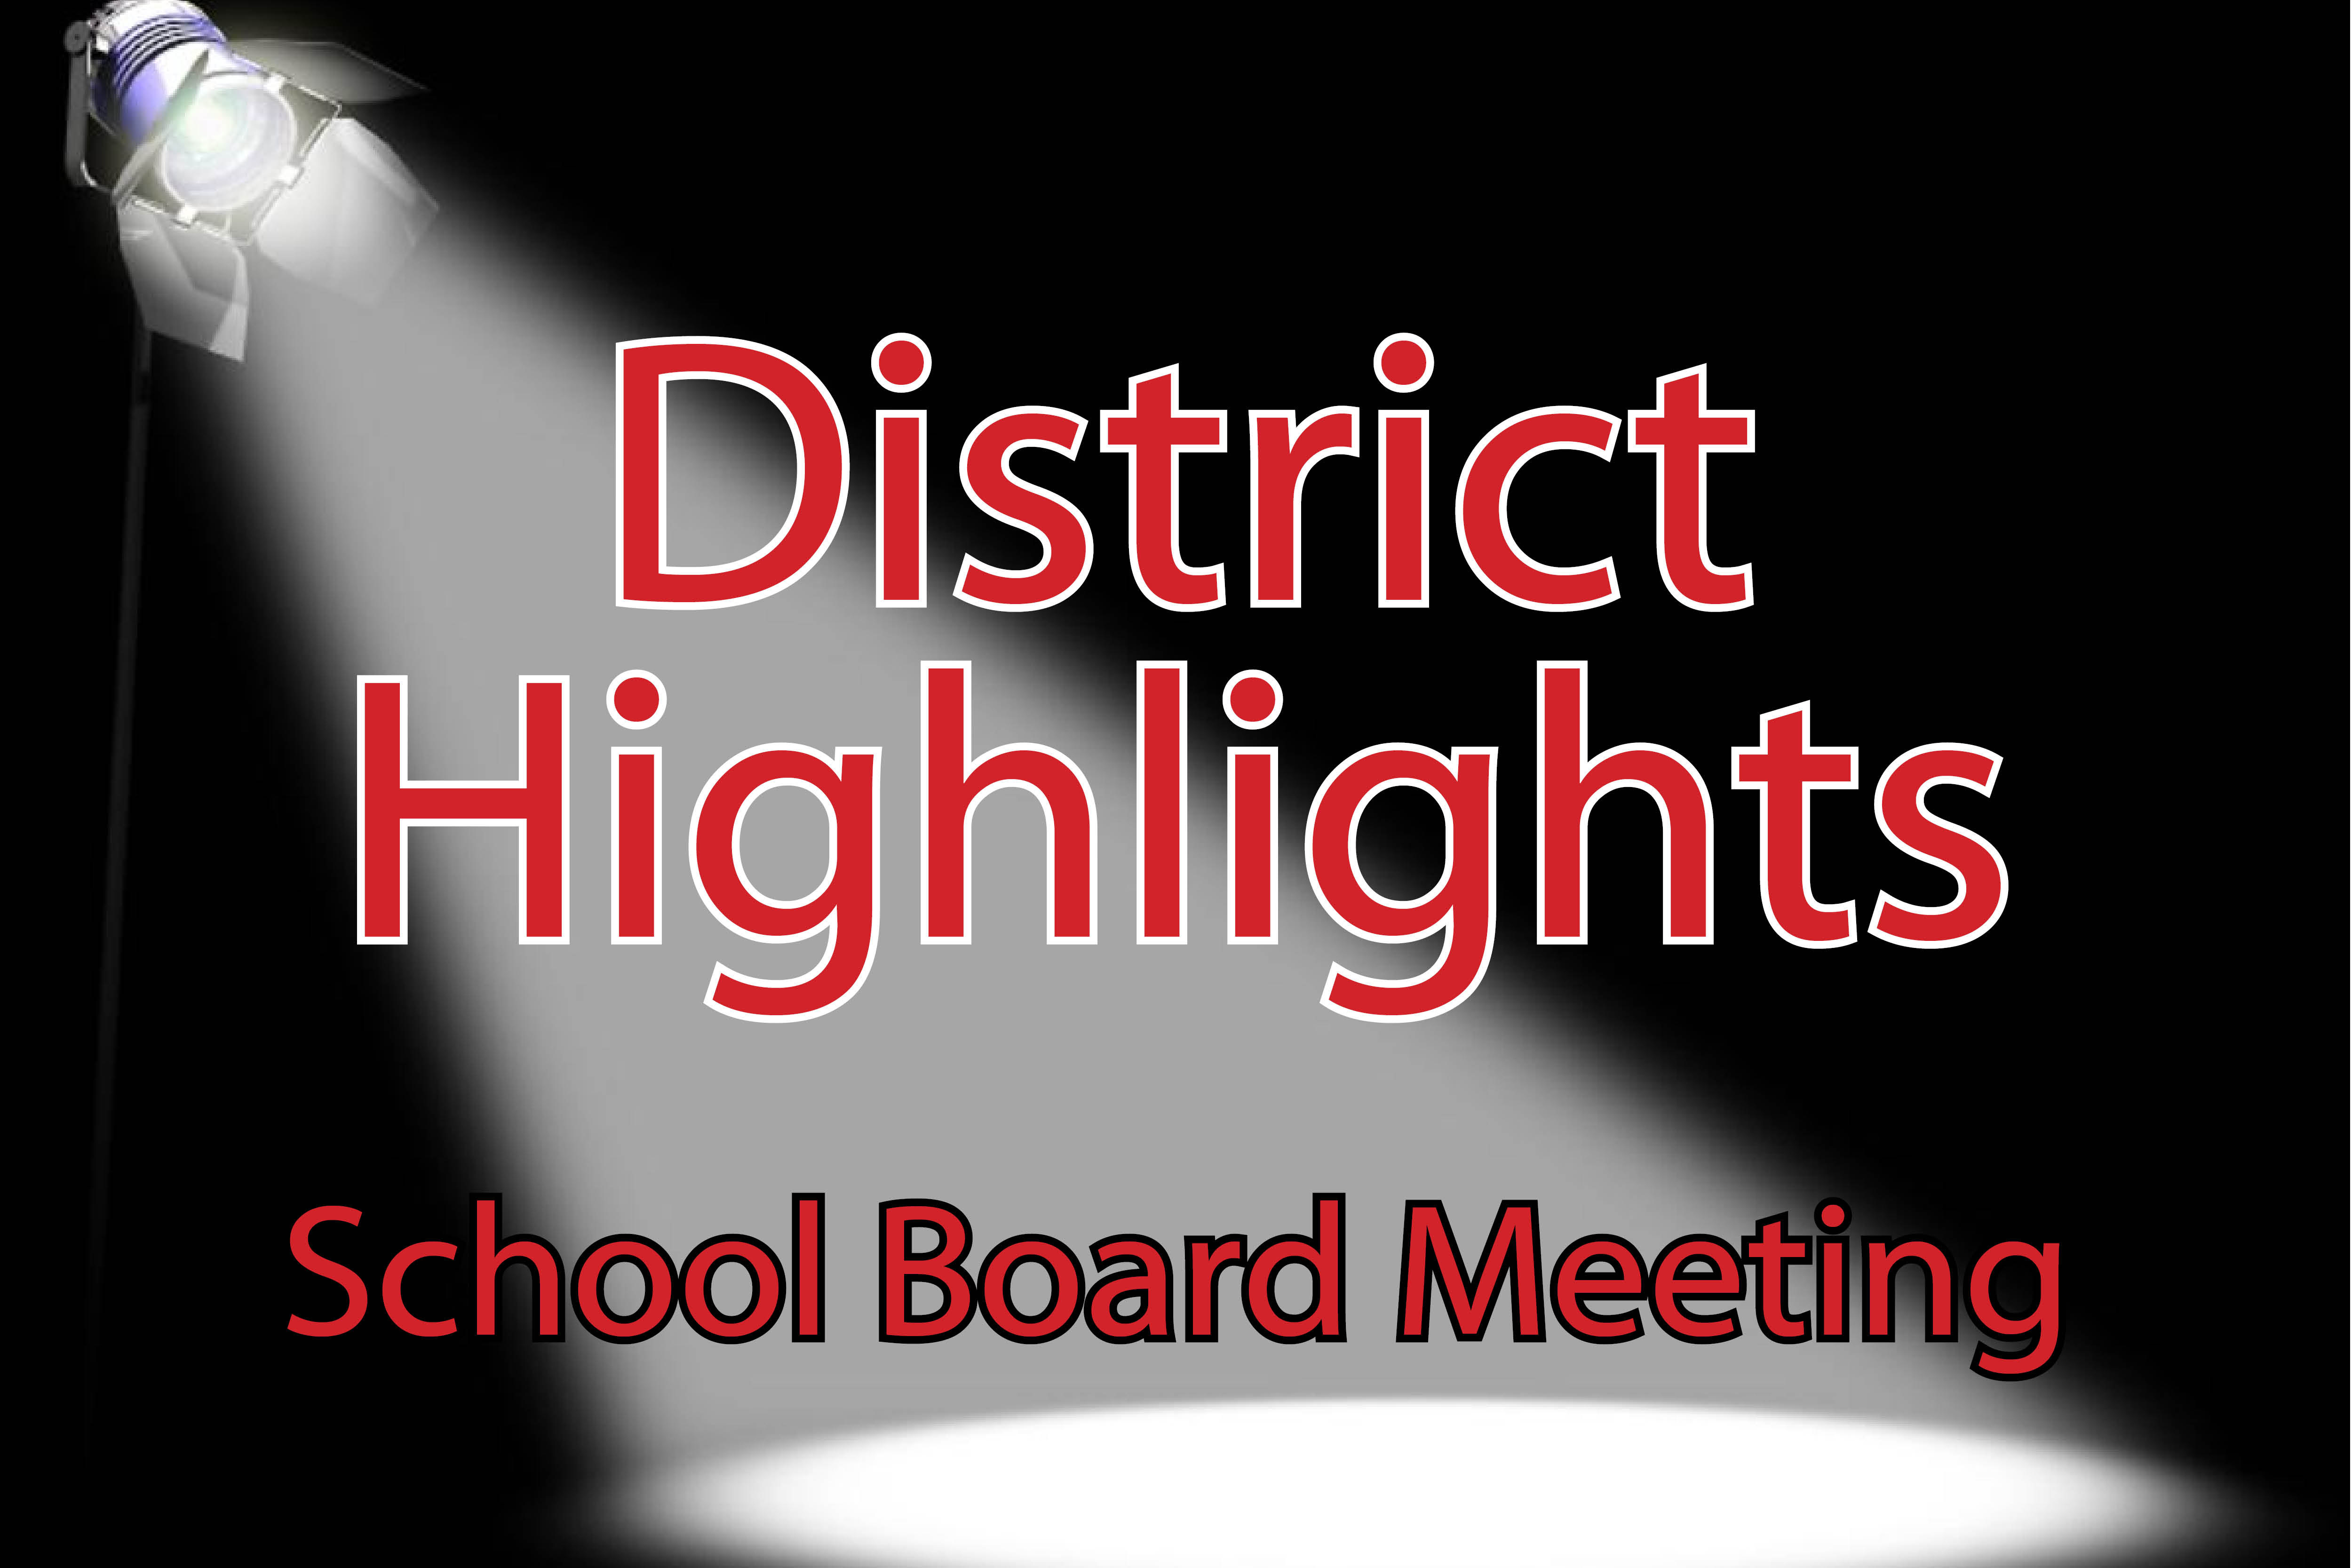 District Highlights from School Board Meetings